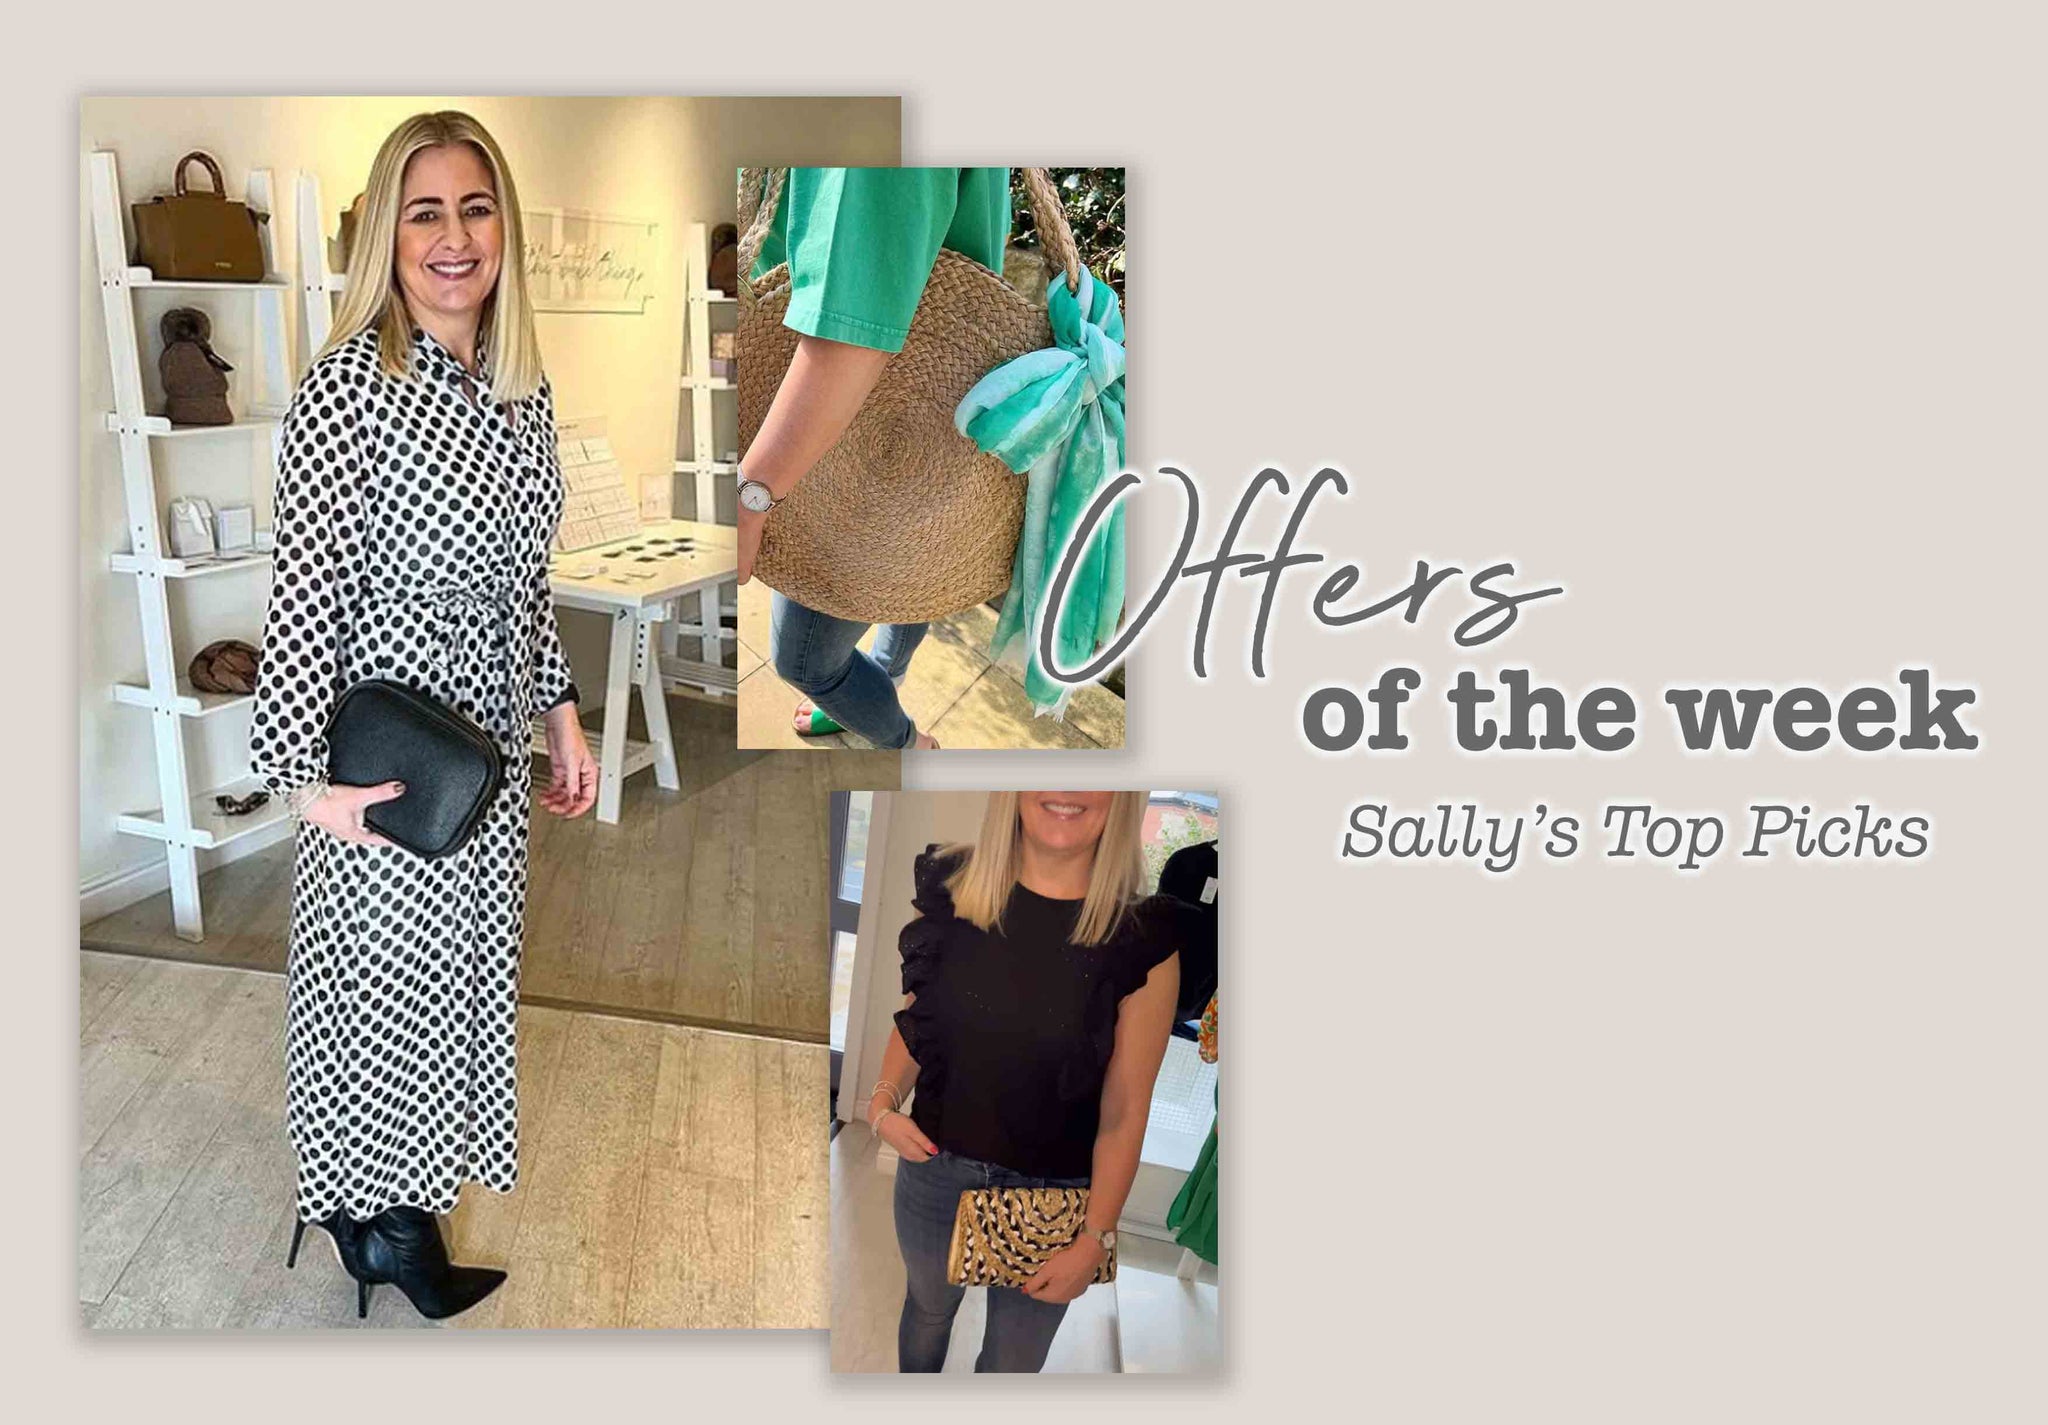 Offers of the Week: Sally’s Top Picks